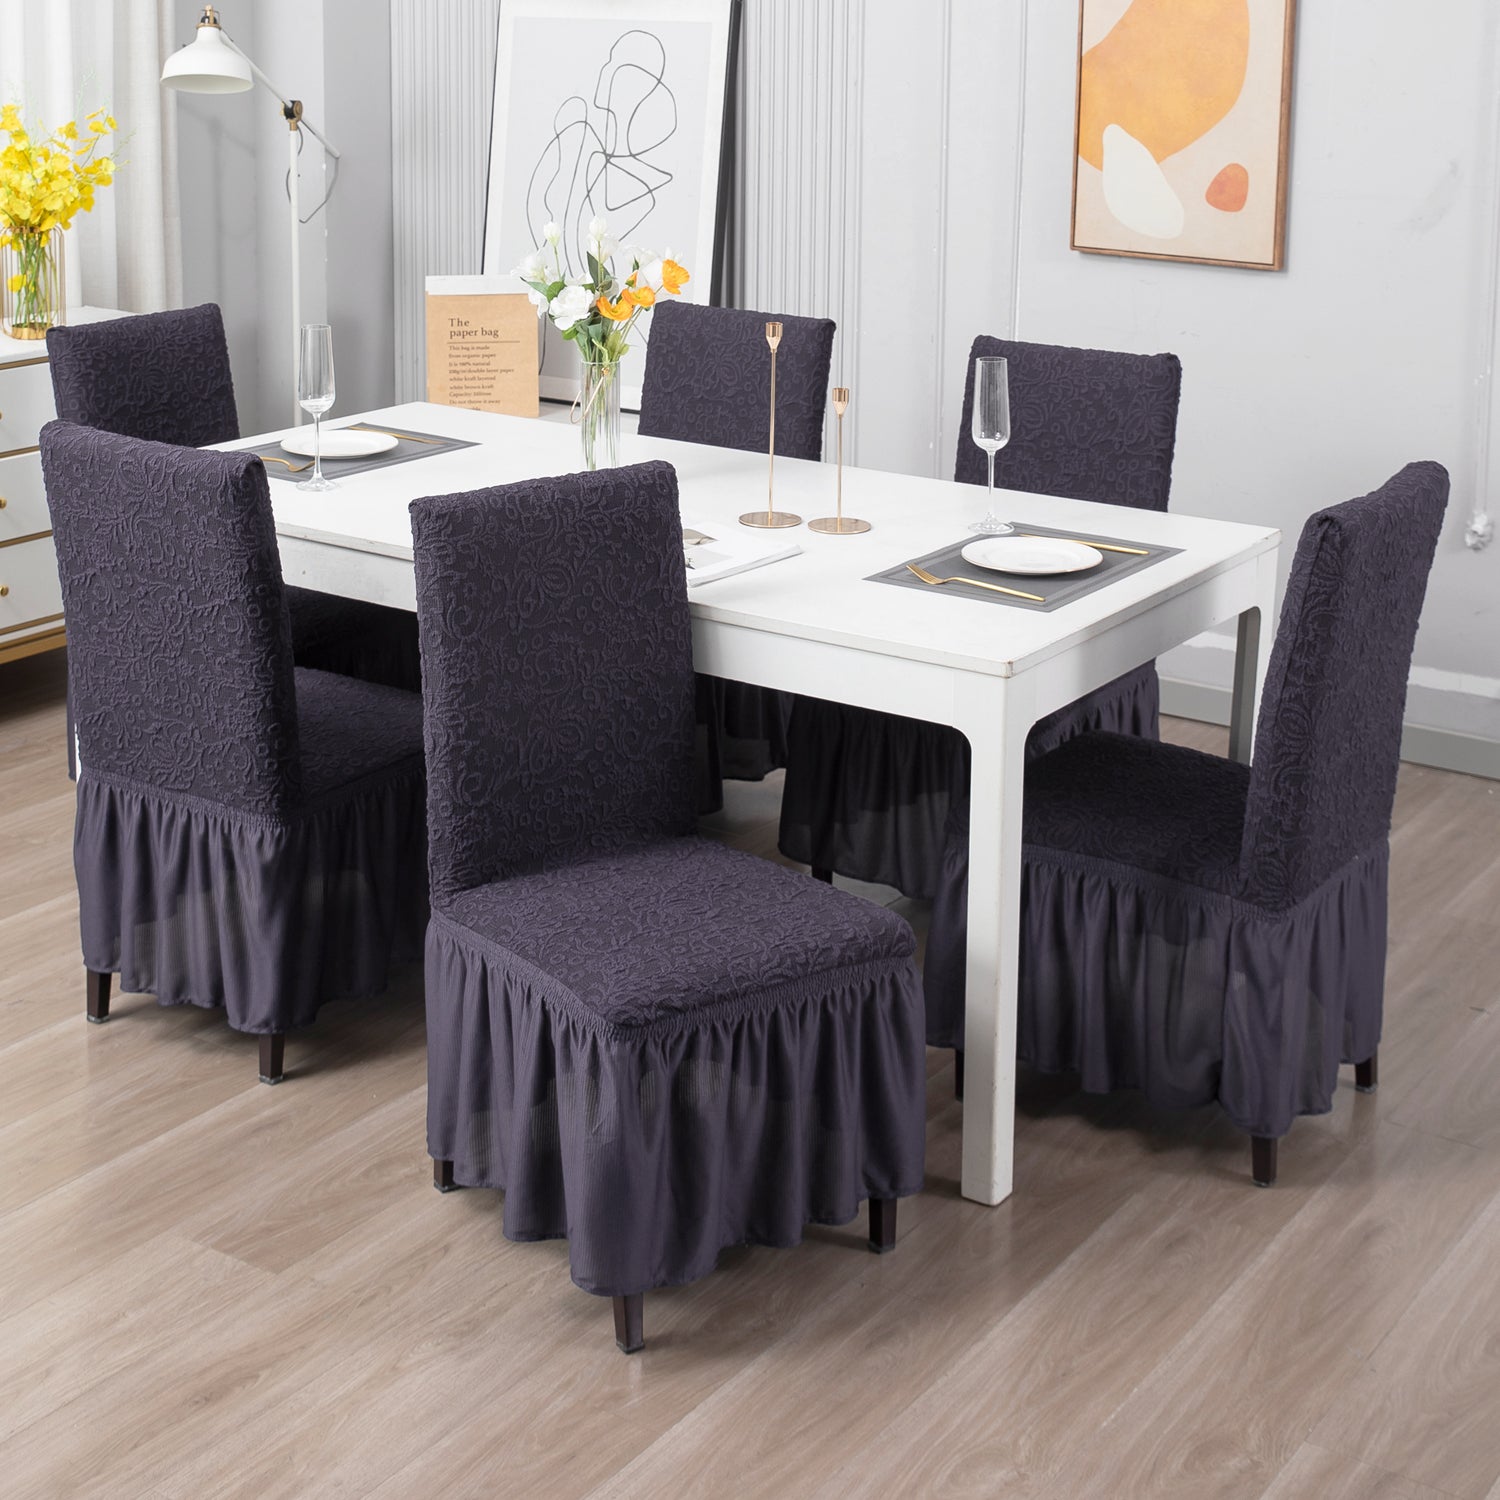 Elastic Stretchable Designer Woven Jacquard Dining Chair Cover with Frill, Abbey Grey